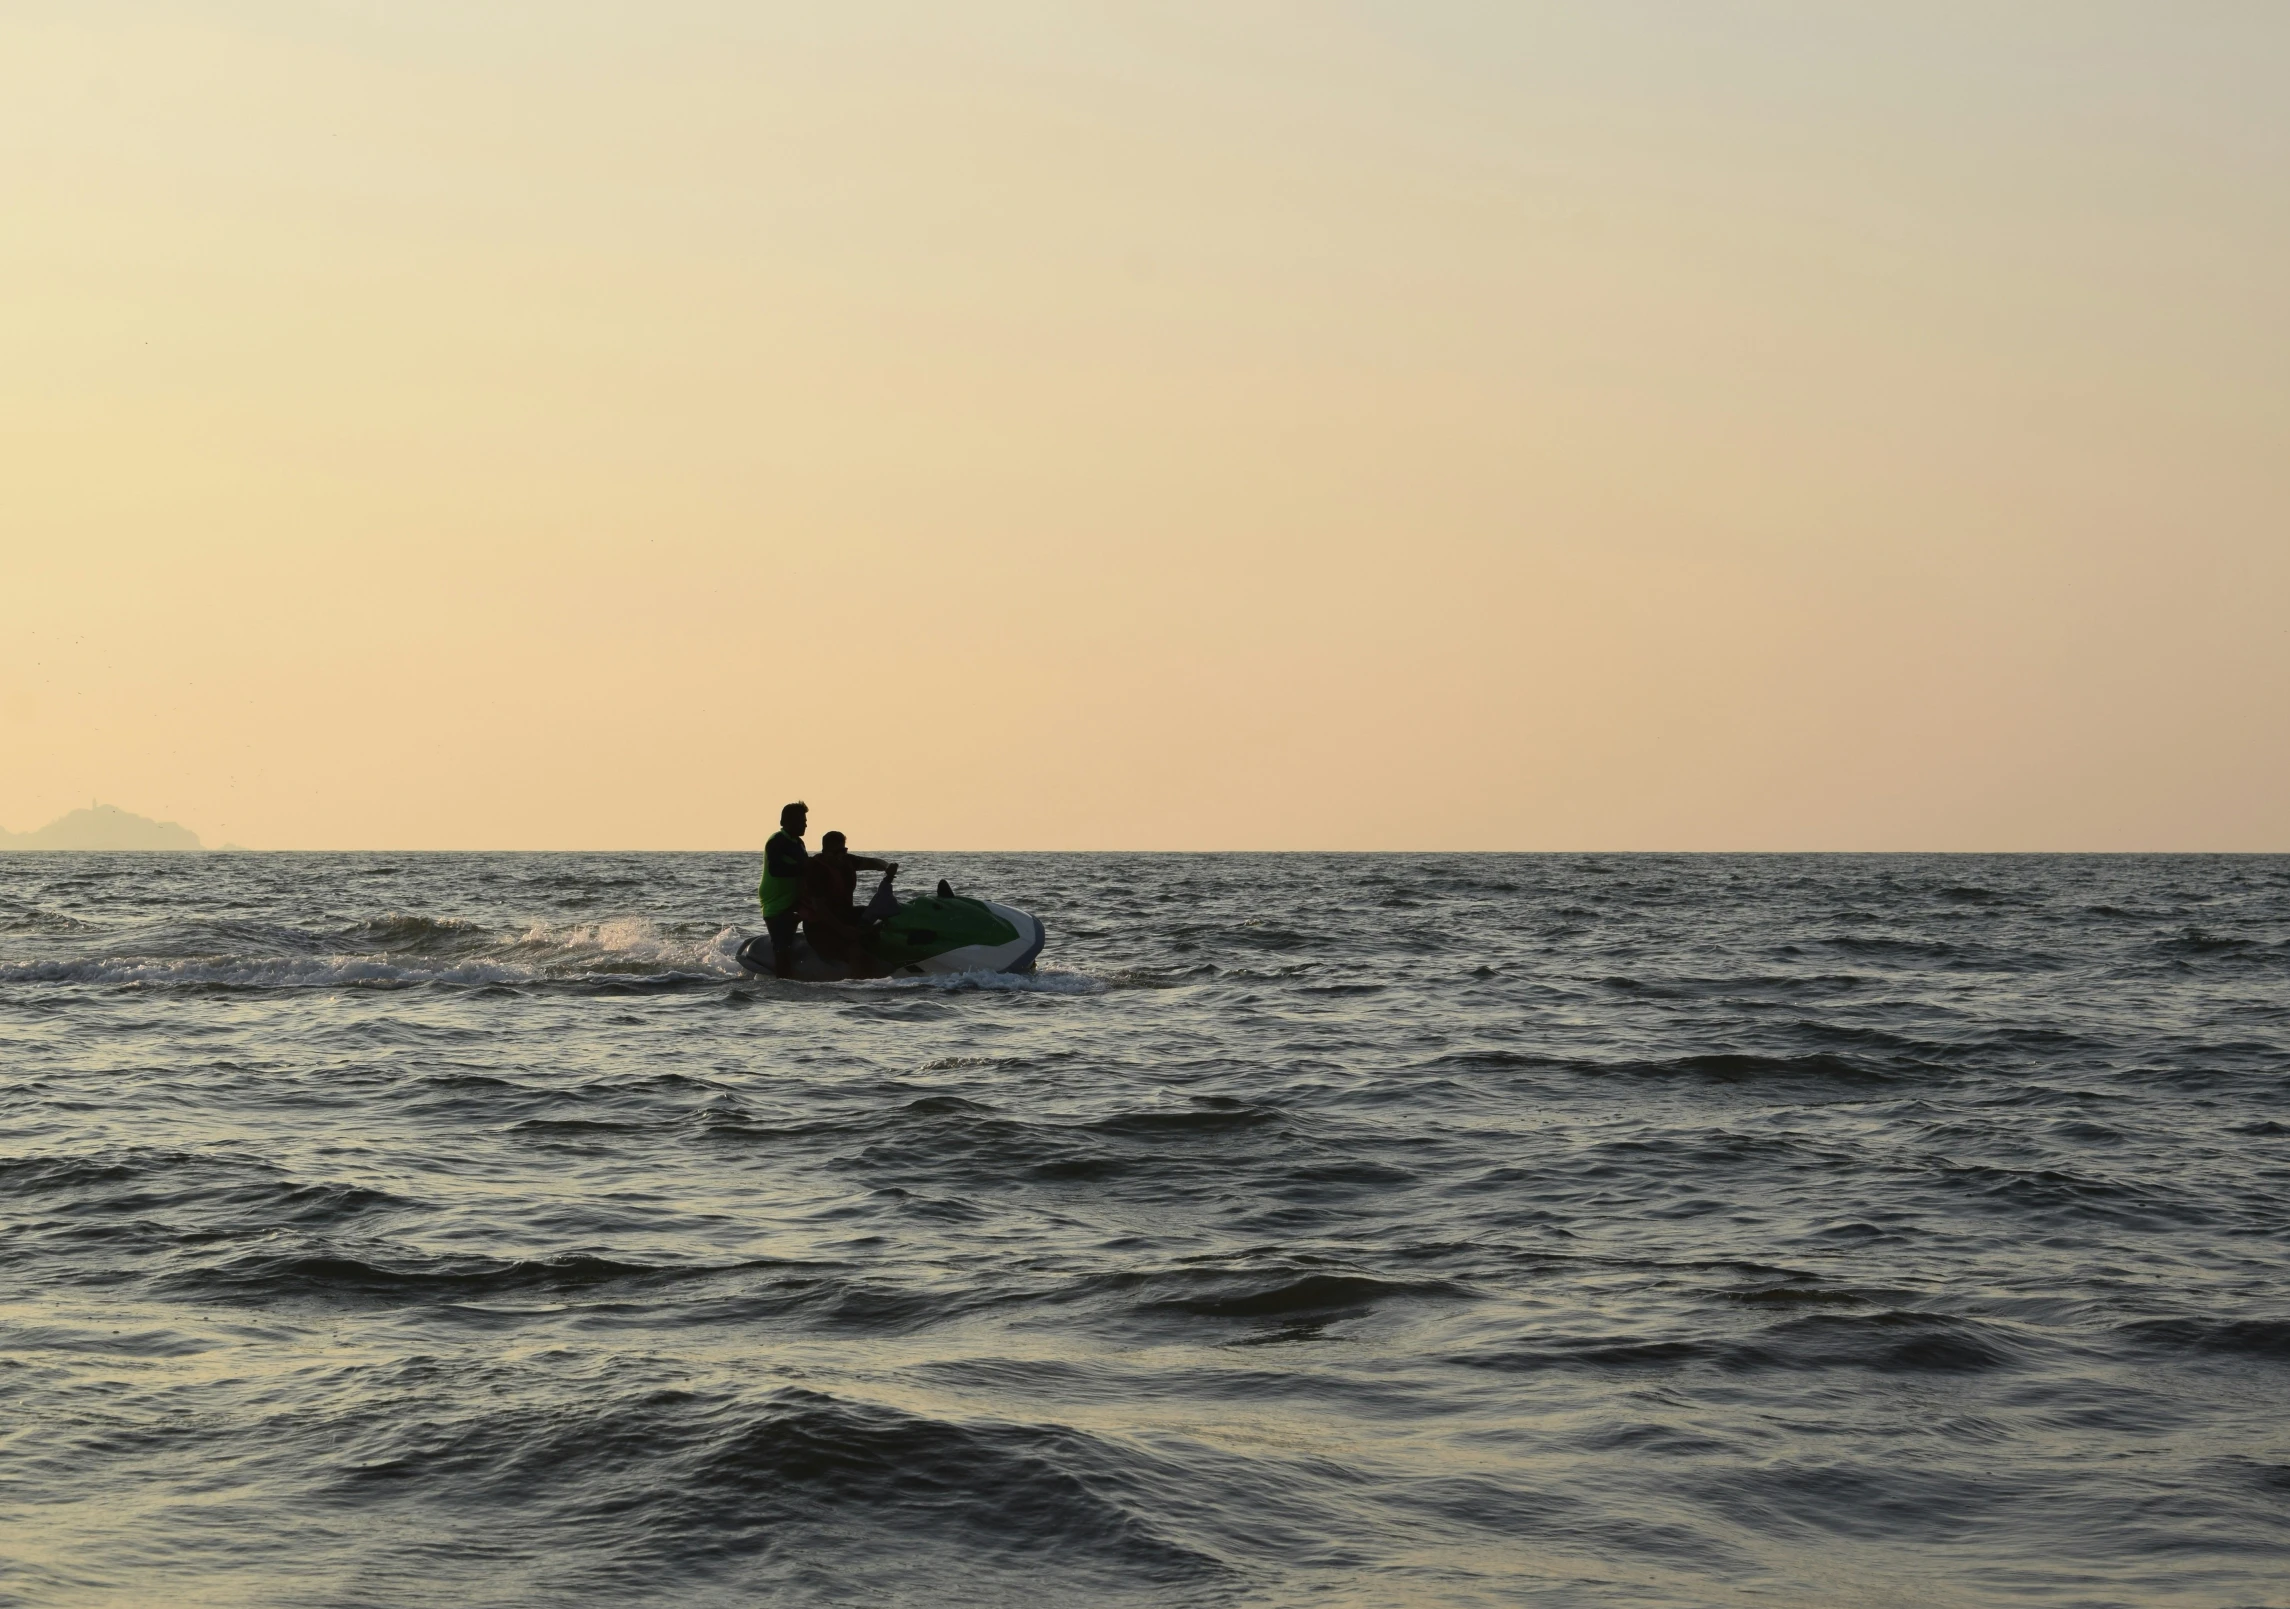 a boat is out on the ocean with two people in it